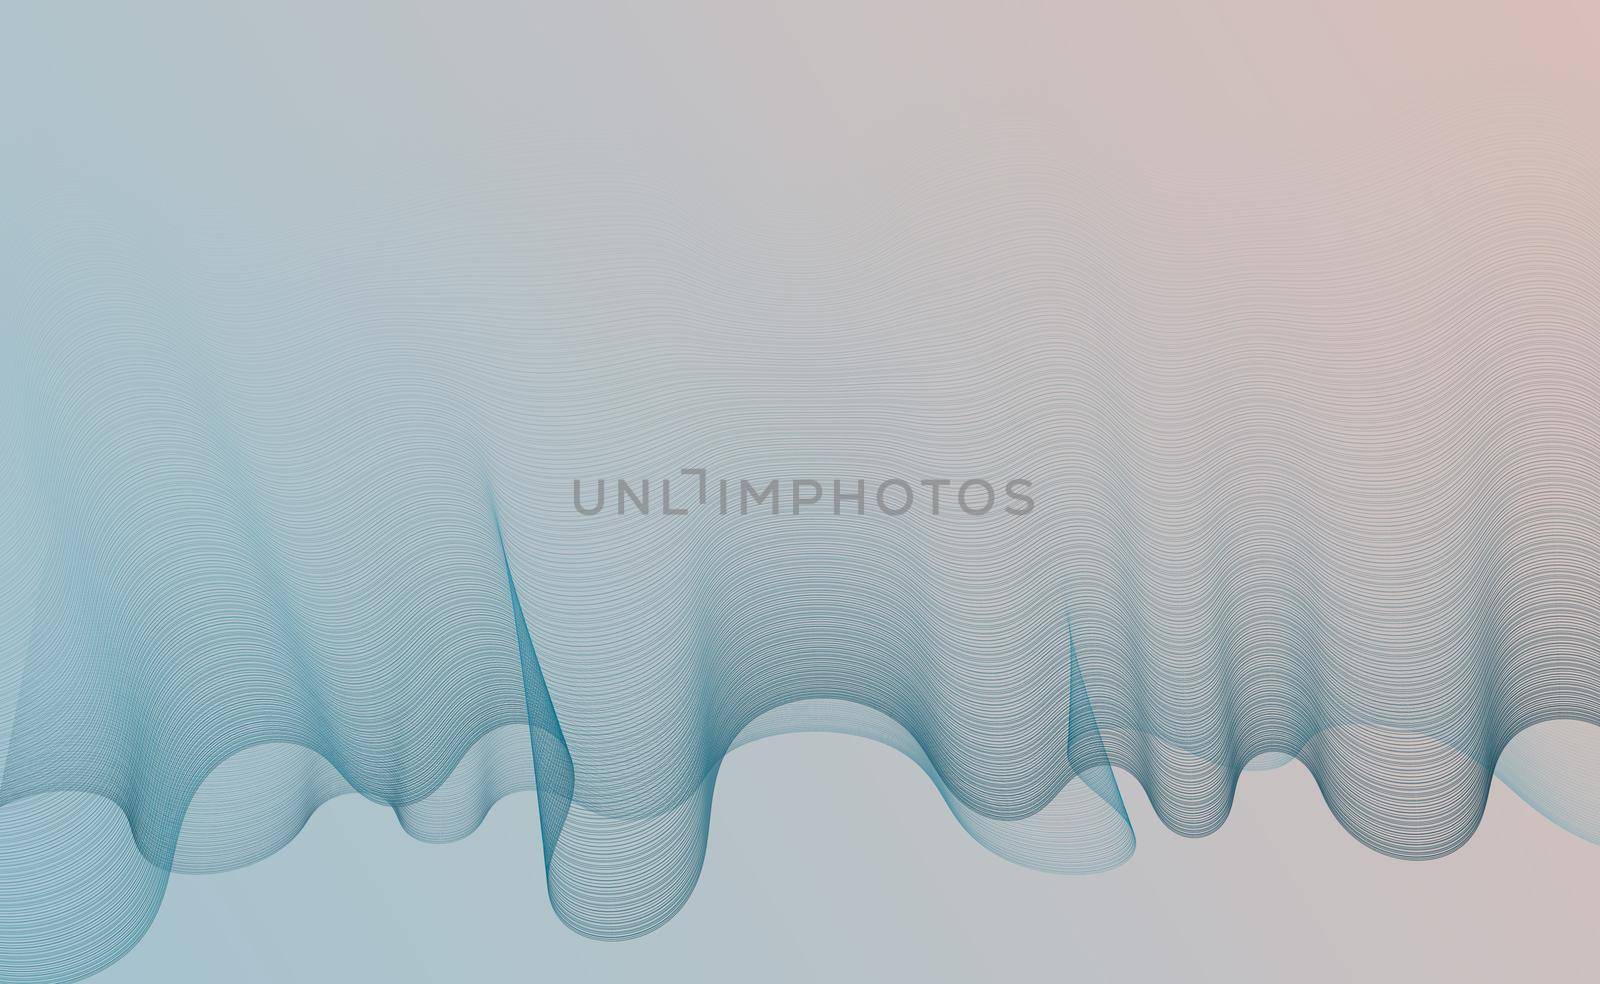 Abstract Wire Mesh Wave Background. Wave background in pastel blue. Ocean sea water, ecology. Beautiful motion waving texture. Abstract lines design template. Illustration